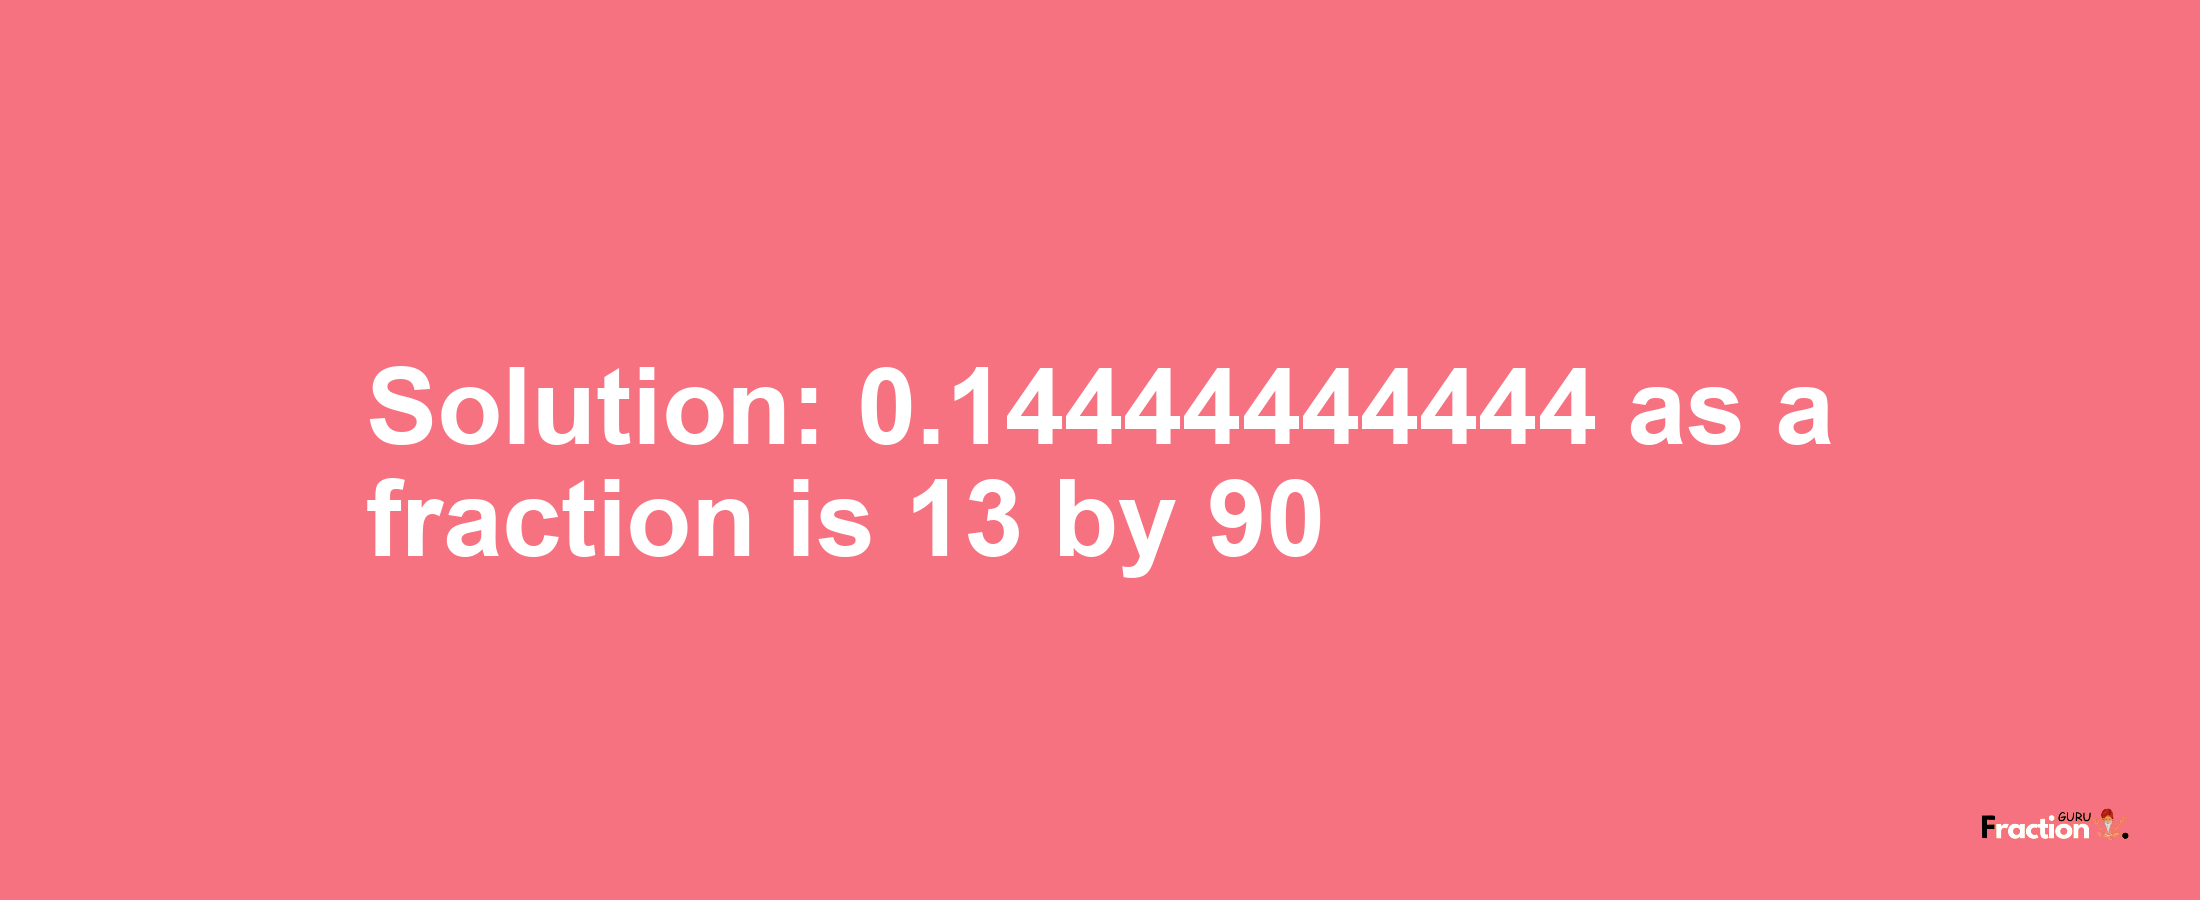 Solution:0.14444444444 as a fraction is 13/90